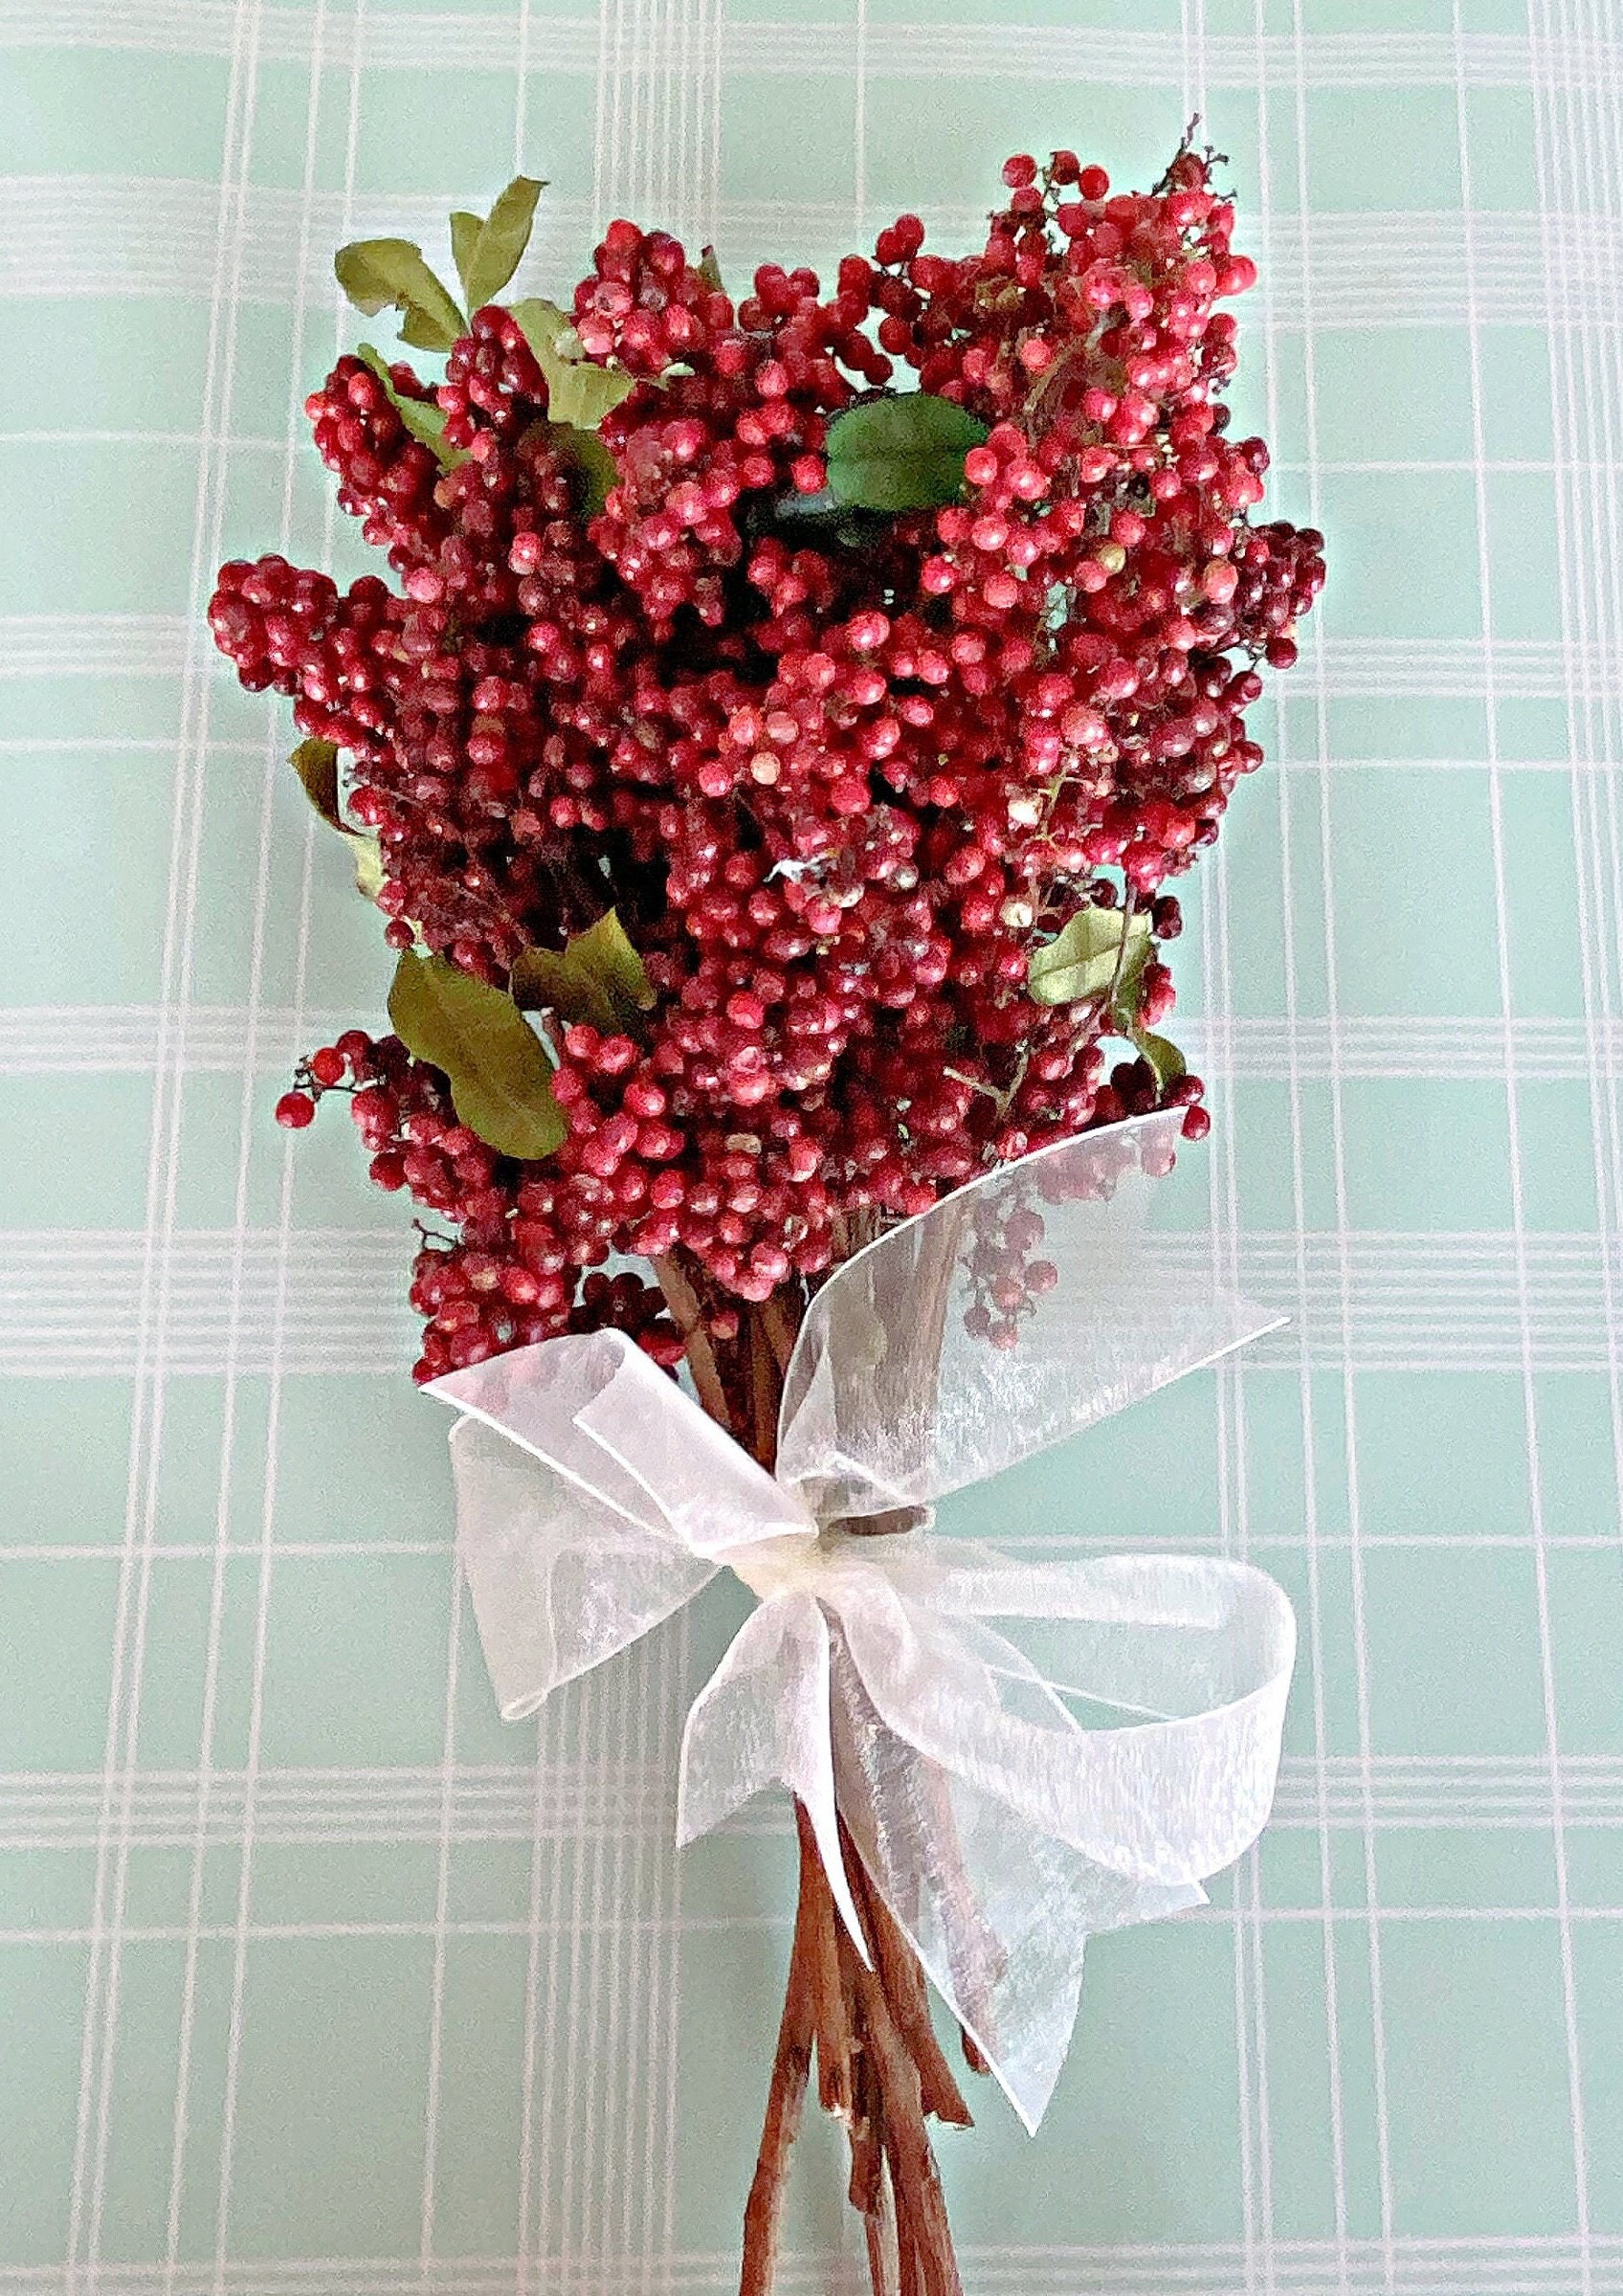 1PC Red Berry Picks Artificial Red Berries Stems for Home Bedroom Fake  Flower